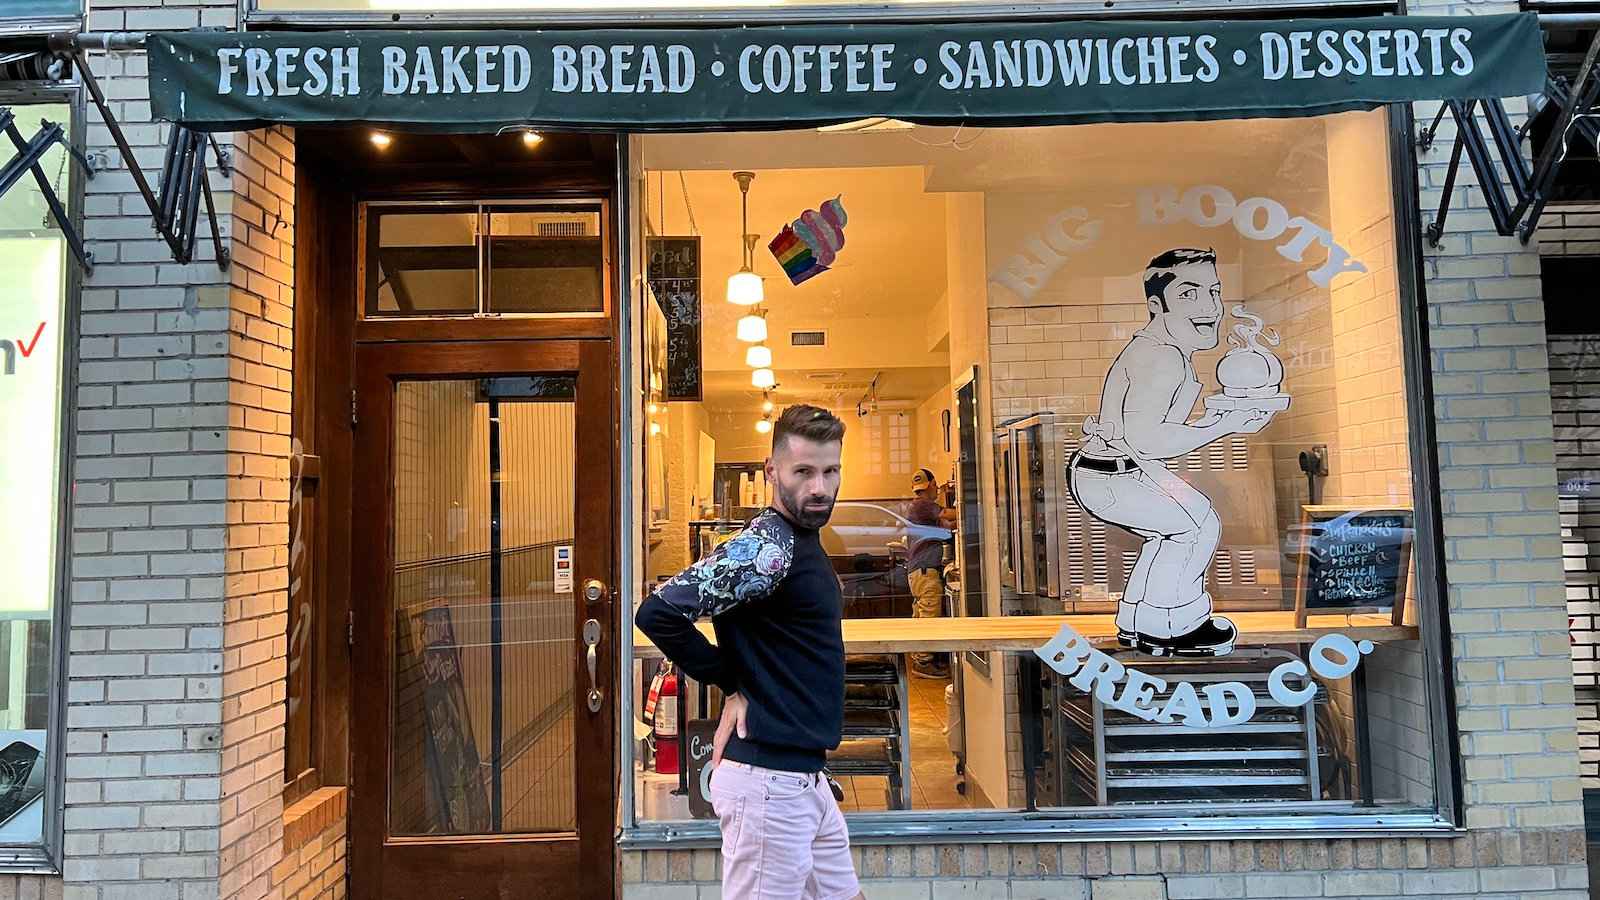 Seby showing off his own booty (and Blue Steel) outside the Big Booty Bread Co. in New York City.